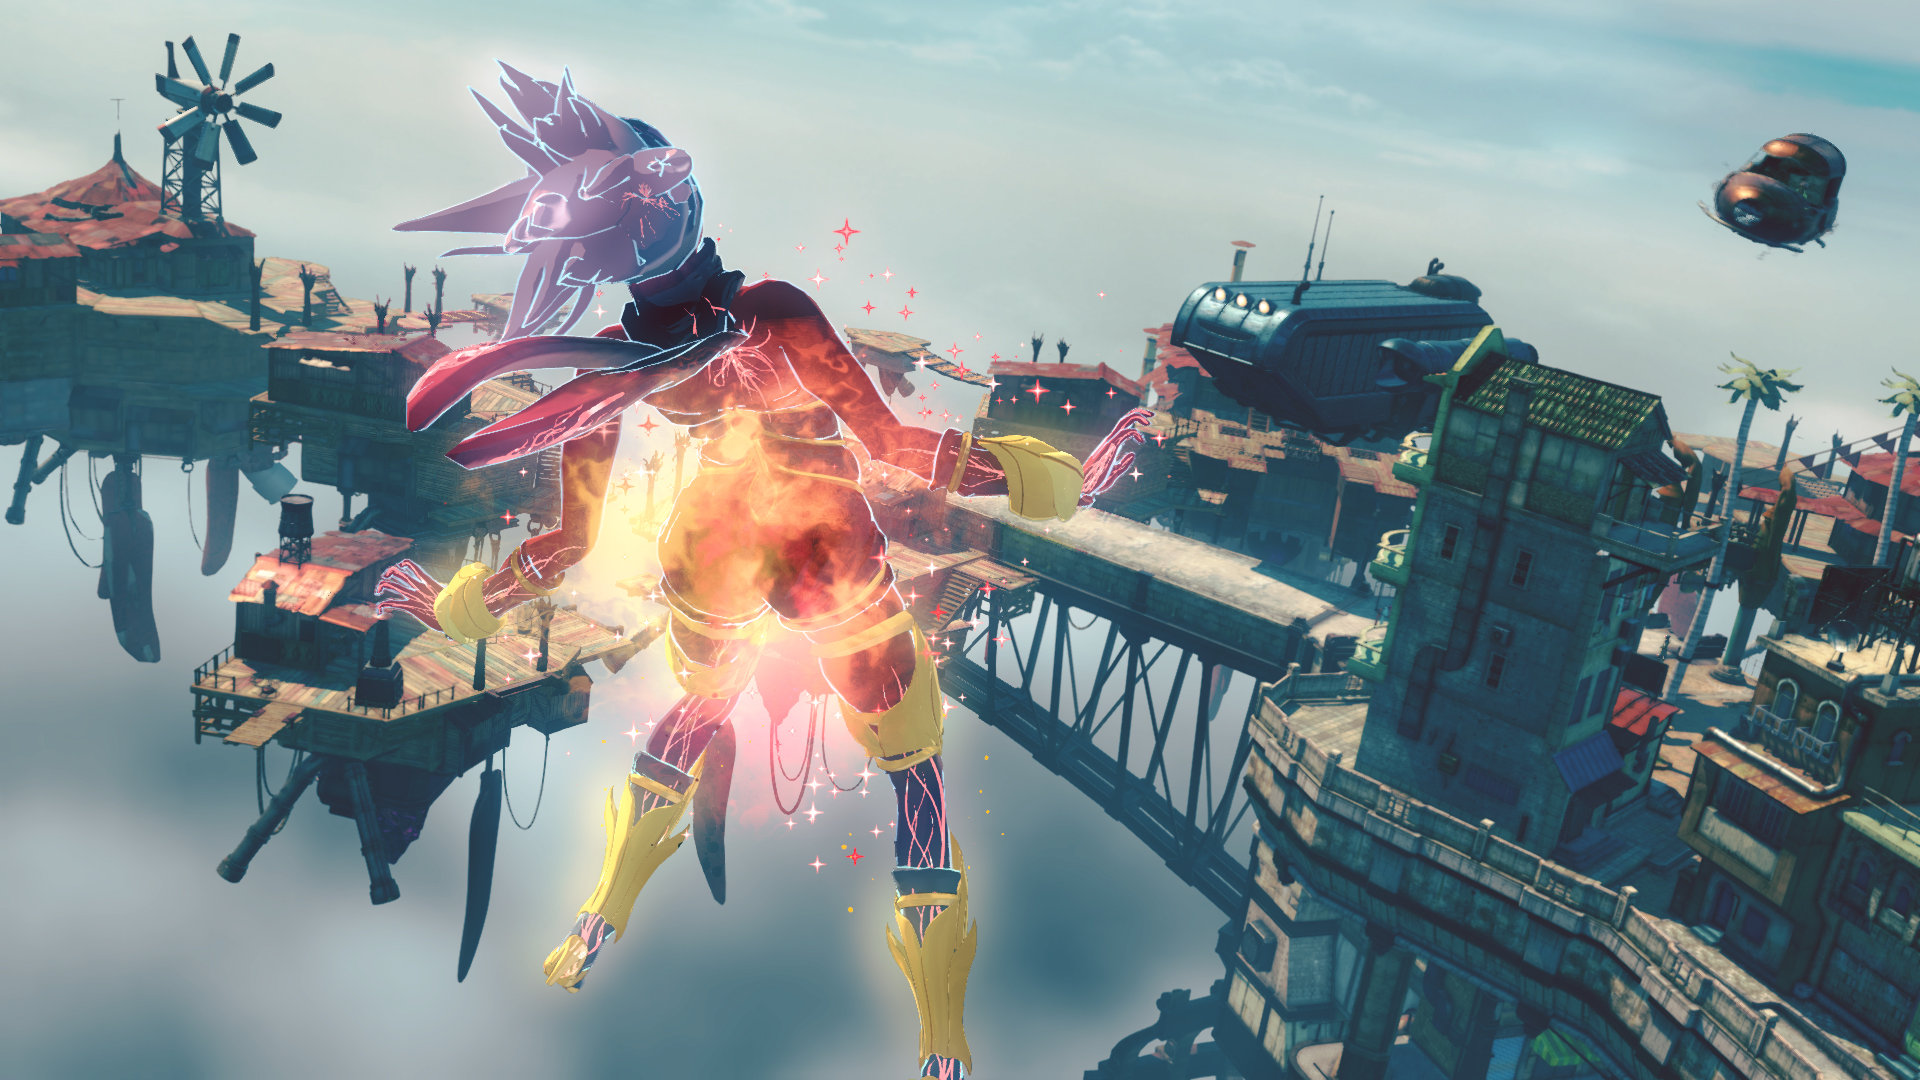 Gravity Rush 2 Backgrounds, Compatible - PC, Mobile, Gadgets| 1920x1080 px